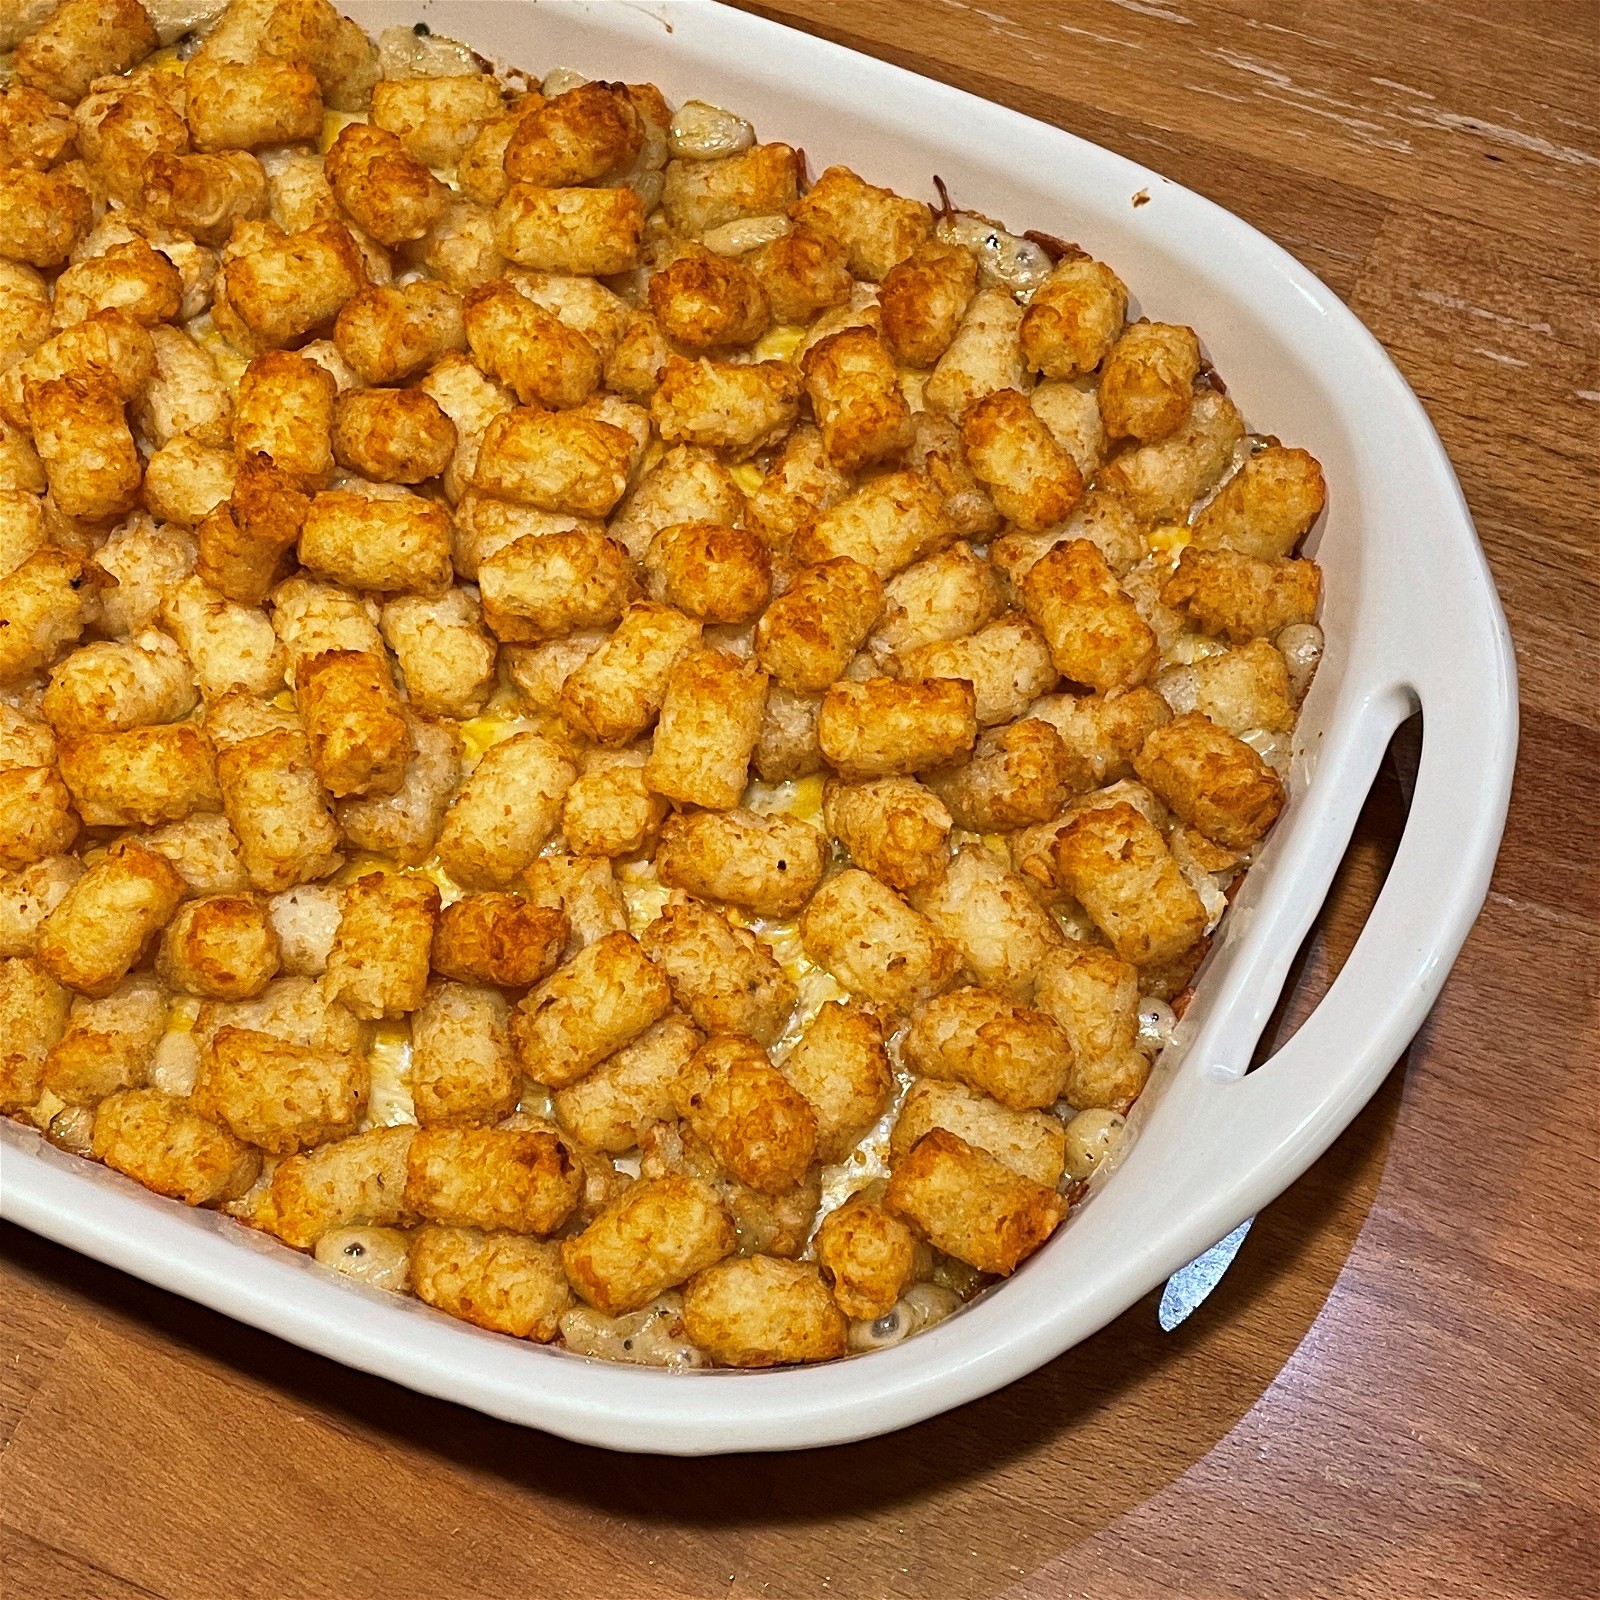 Tater tots – Andy Cooks